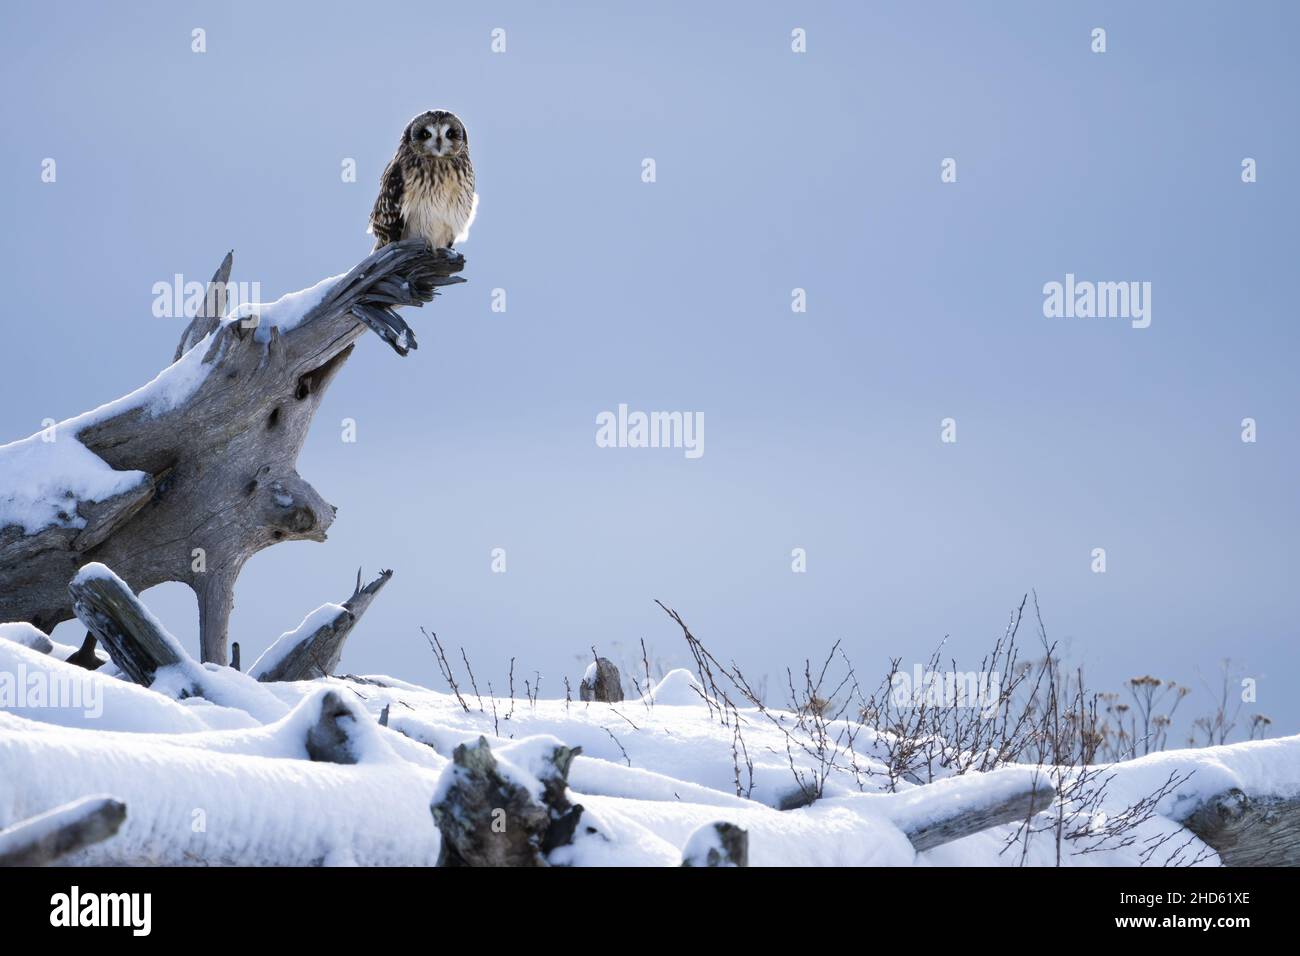 Short-eared owl (Asio flammeus) perched on driftwood covered in snow, Fort Casey State Park, Coupeville, Whidbey Island, Washington, USA Stock Photo